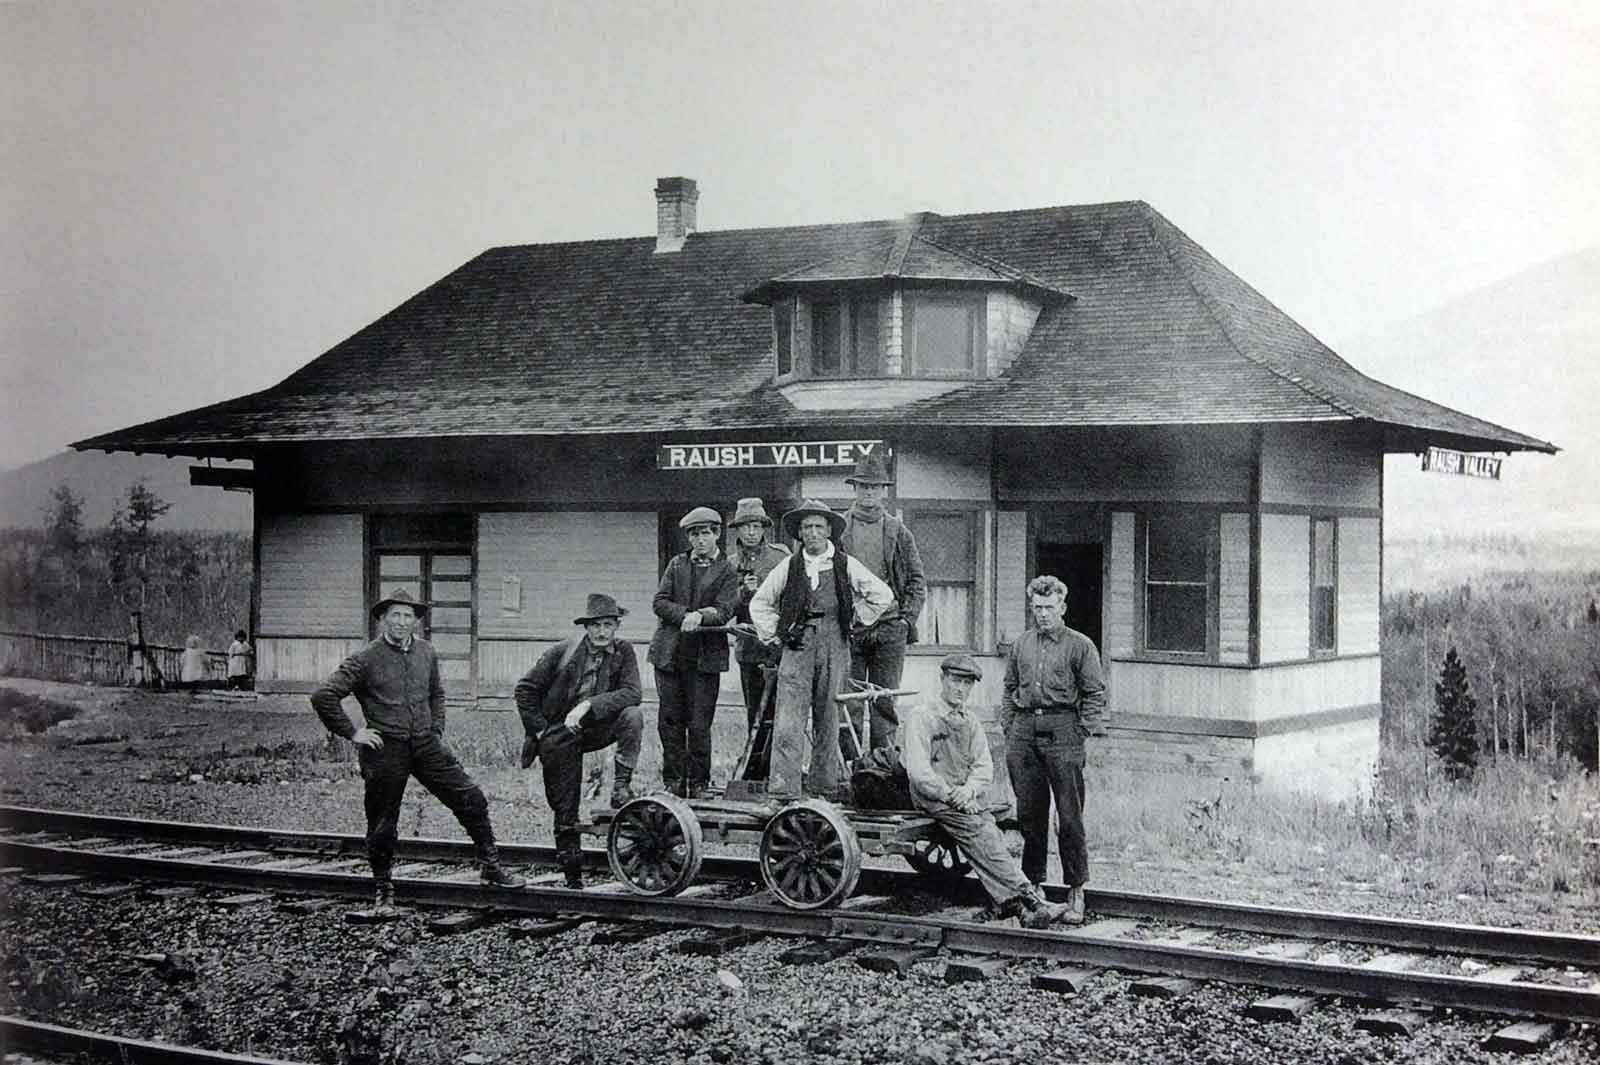 Raush Valley station on the Grand Trunk Pacific Railway, 1921